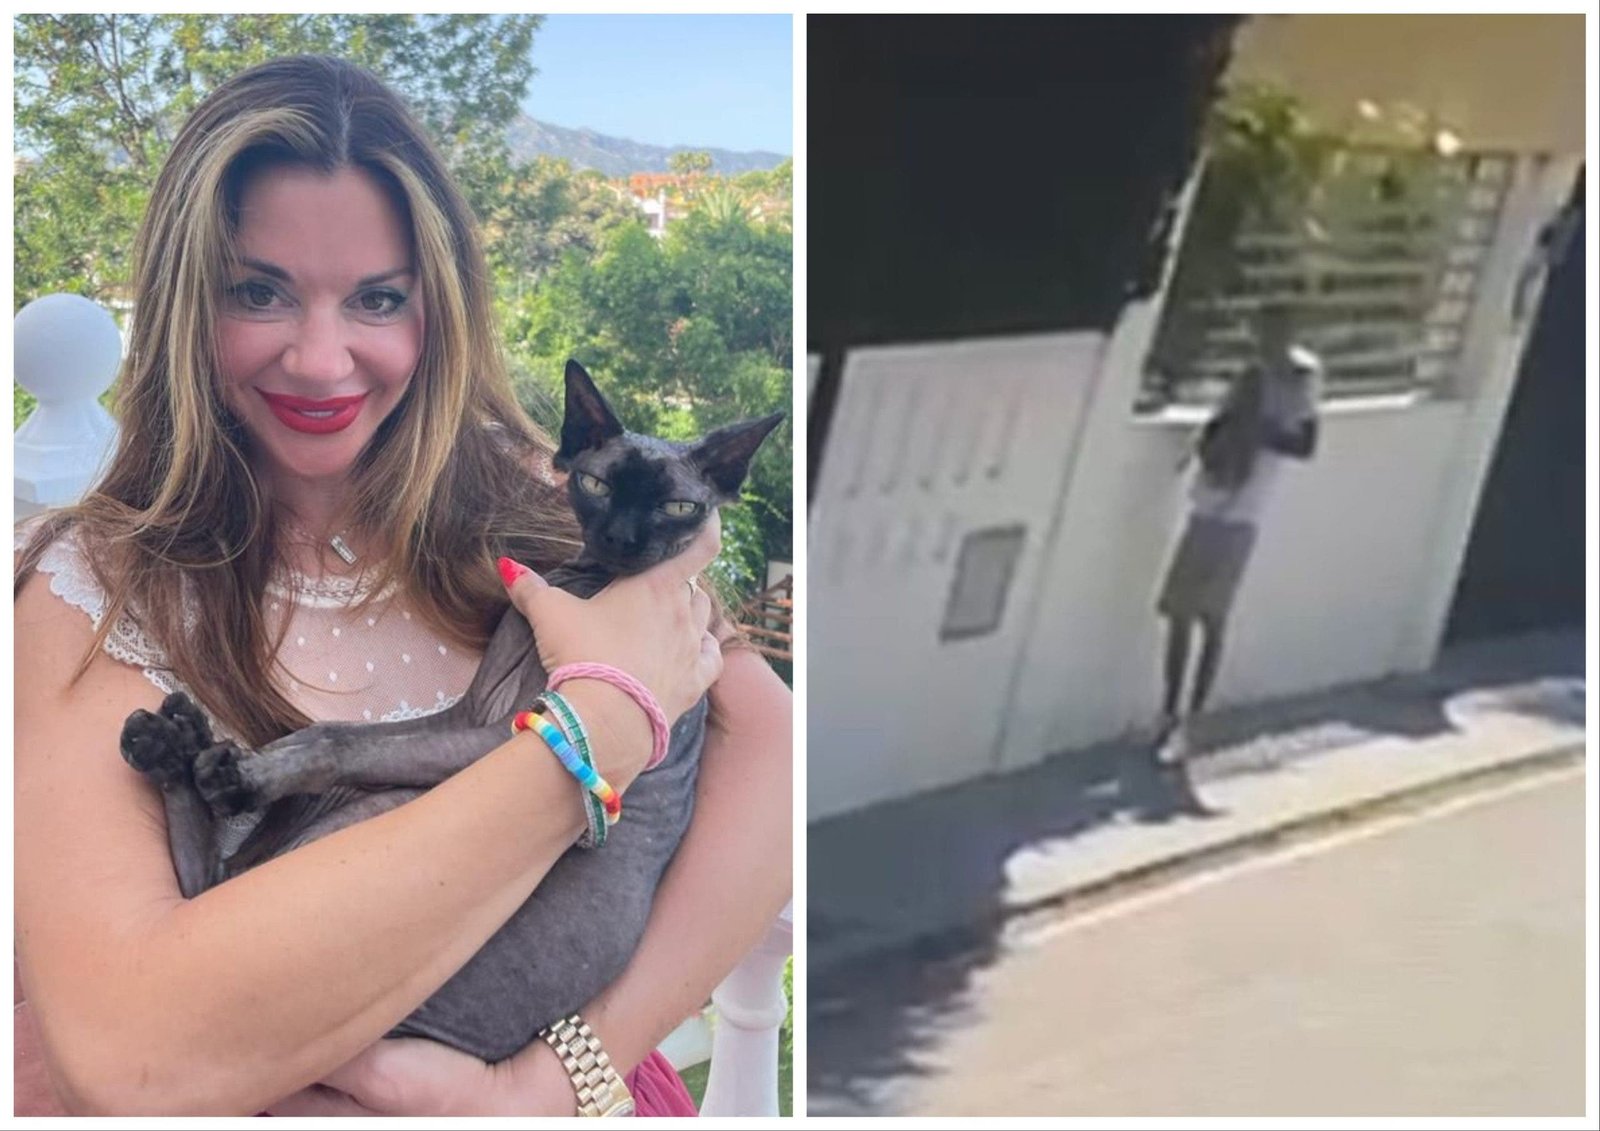 Heartbreaking: Beloved Family Cat Snatched from Home in Marbella - British Owner Pledges €3,000 - collage maker 22 sep 2023 11 52 am 2019 scaled 1 - Marbella News Crime -